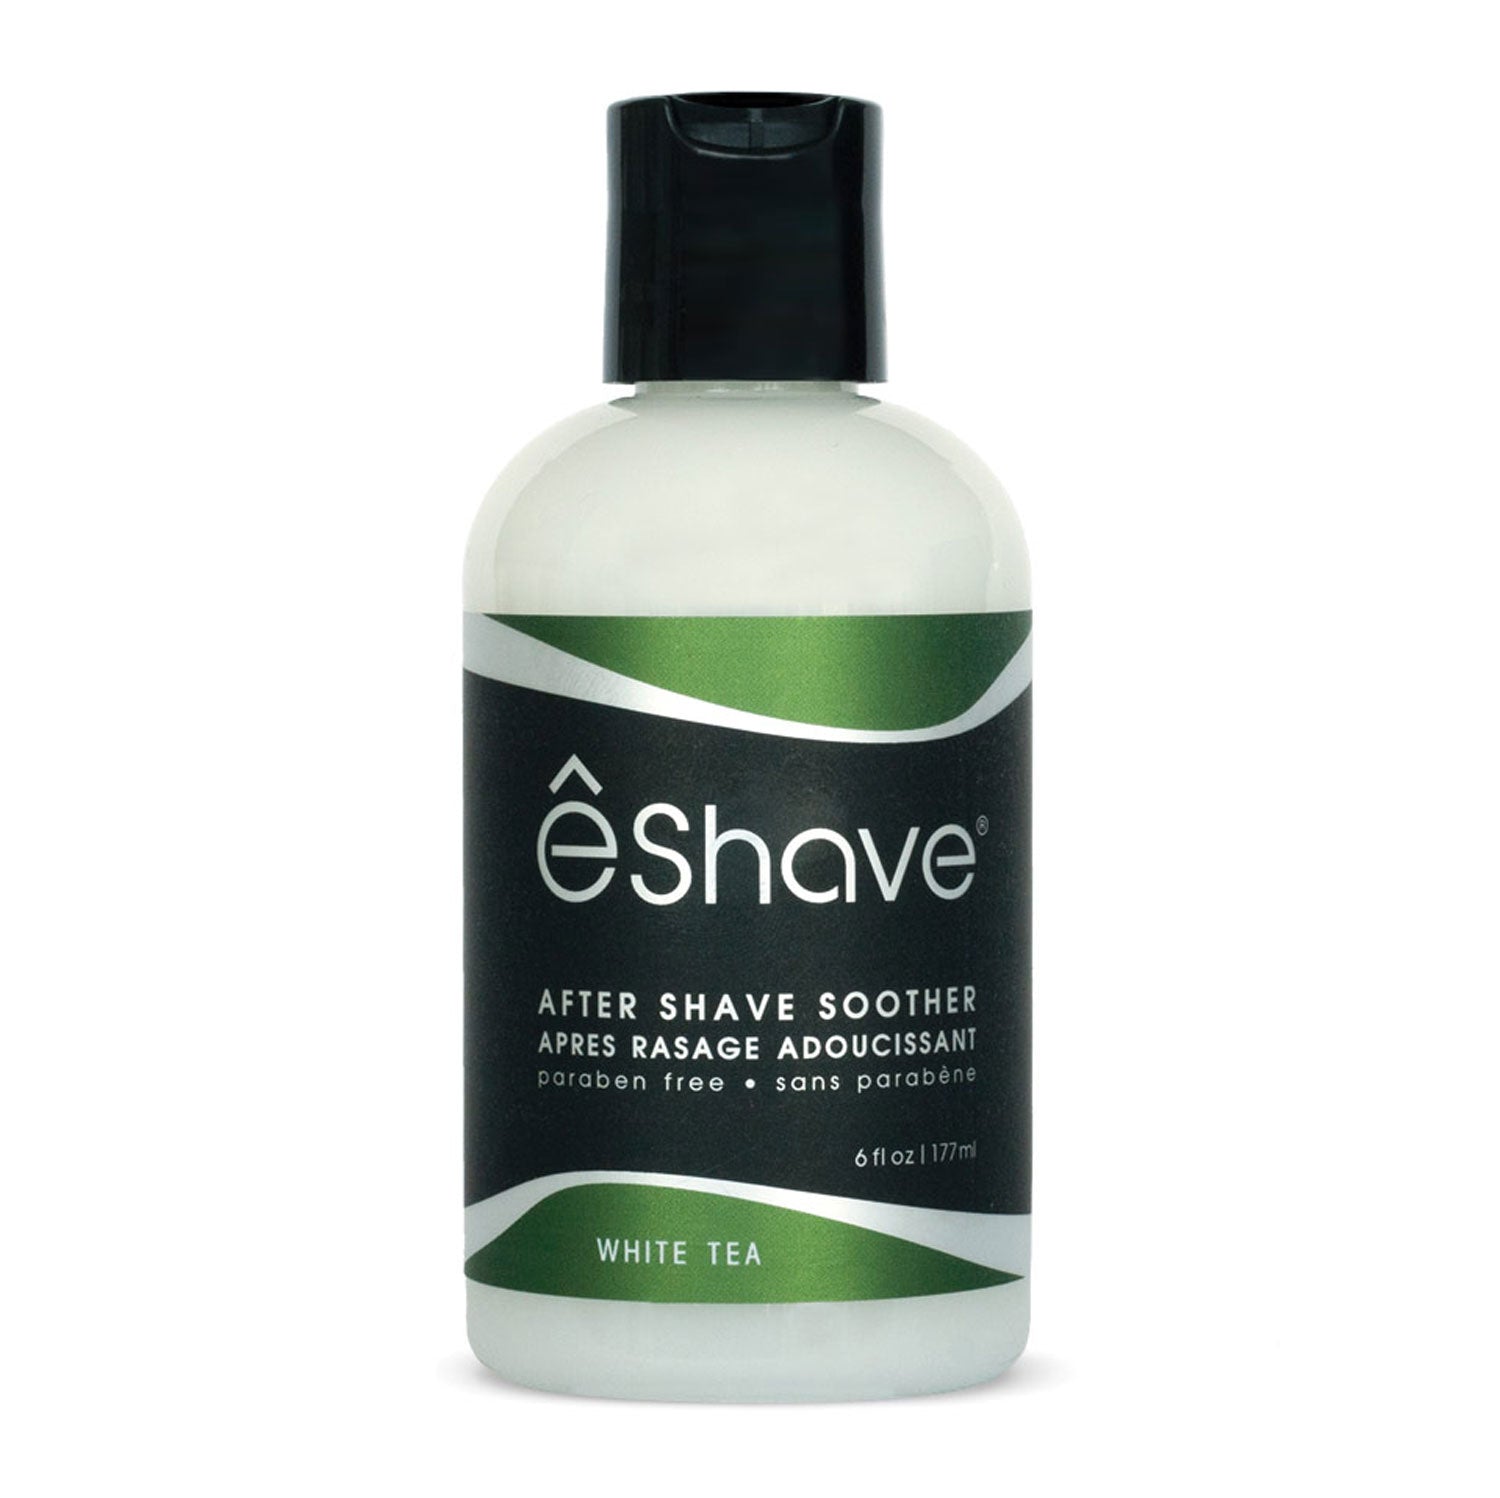 eShave After Shave Soother White Tea 180g - Orcadia